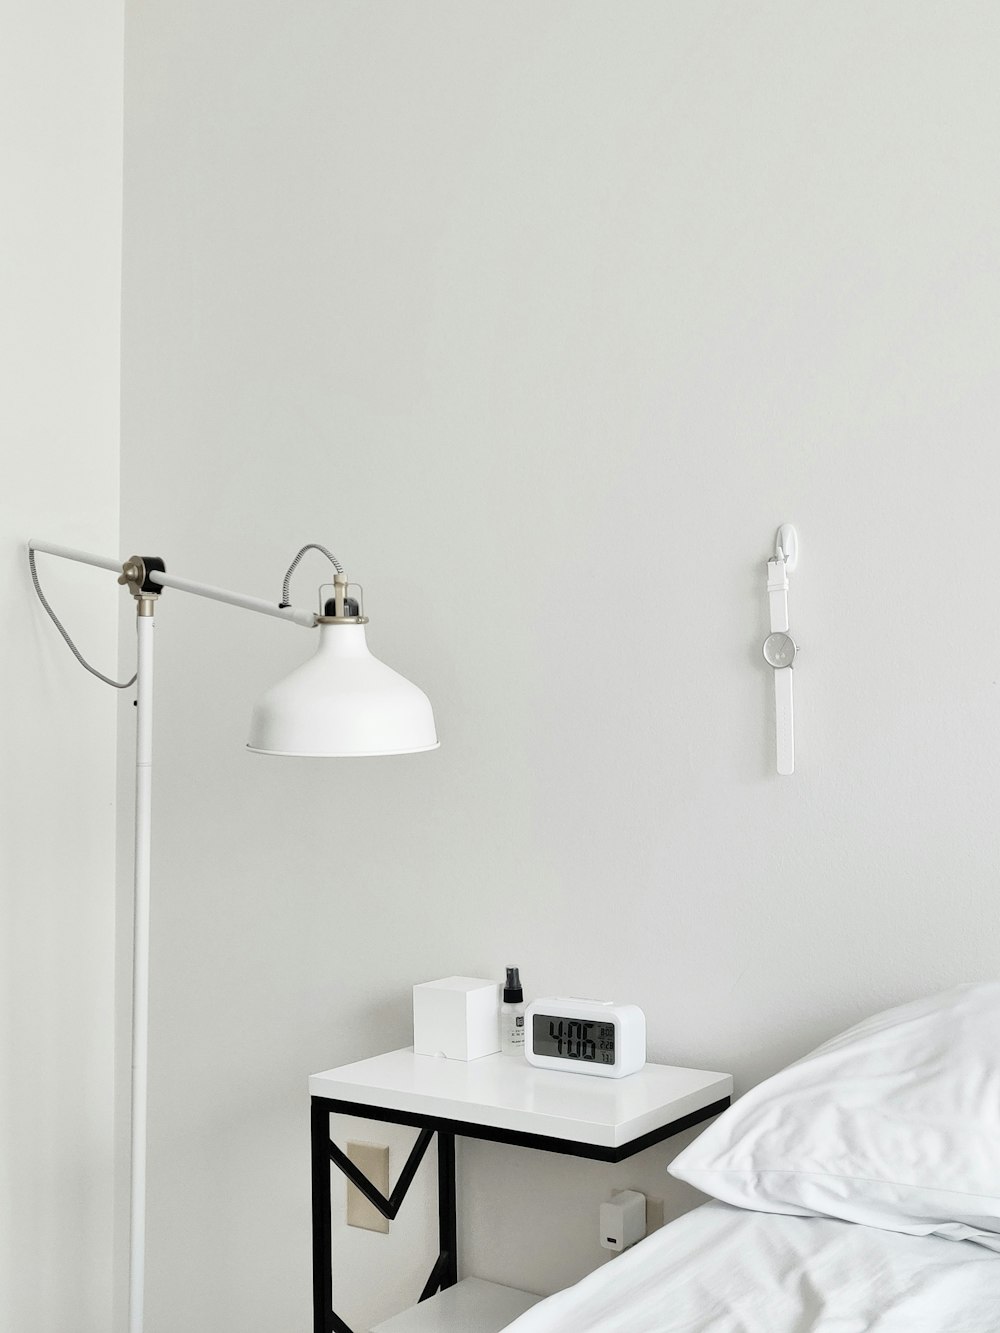 a bed with a white comforter and a white lamp